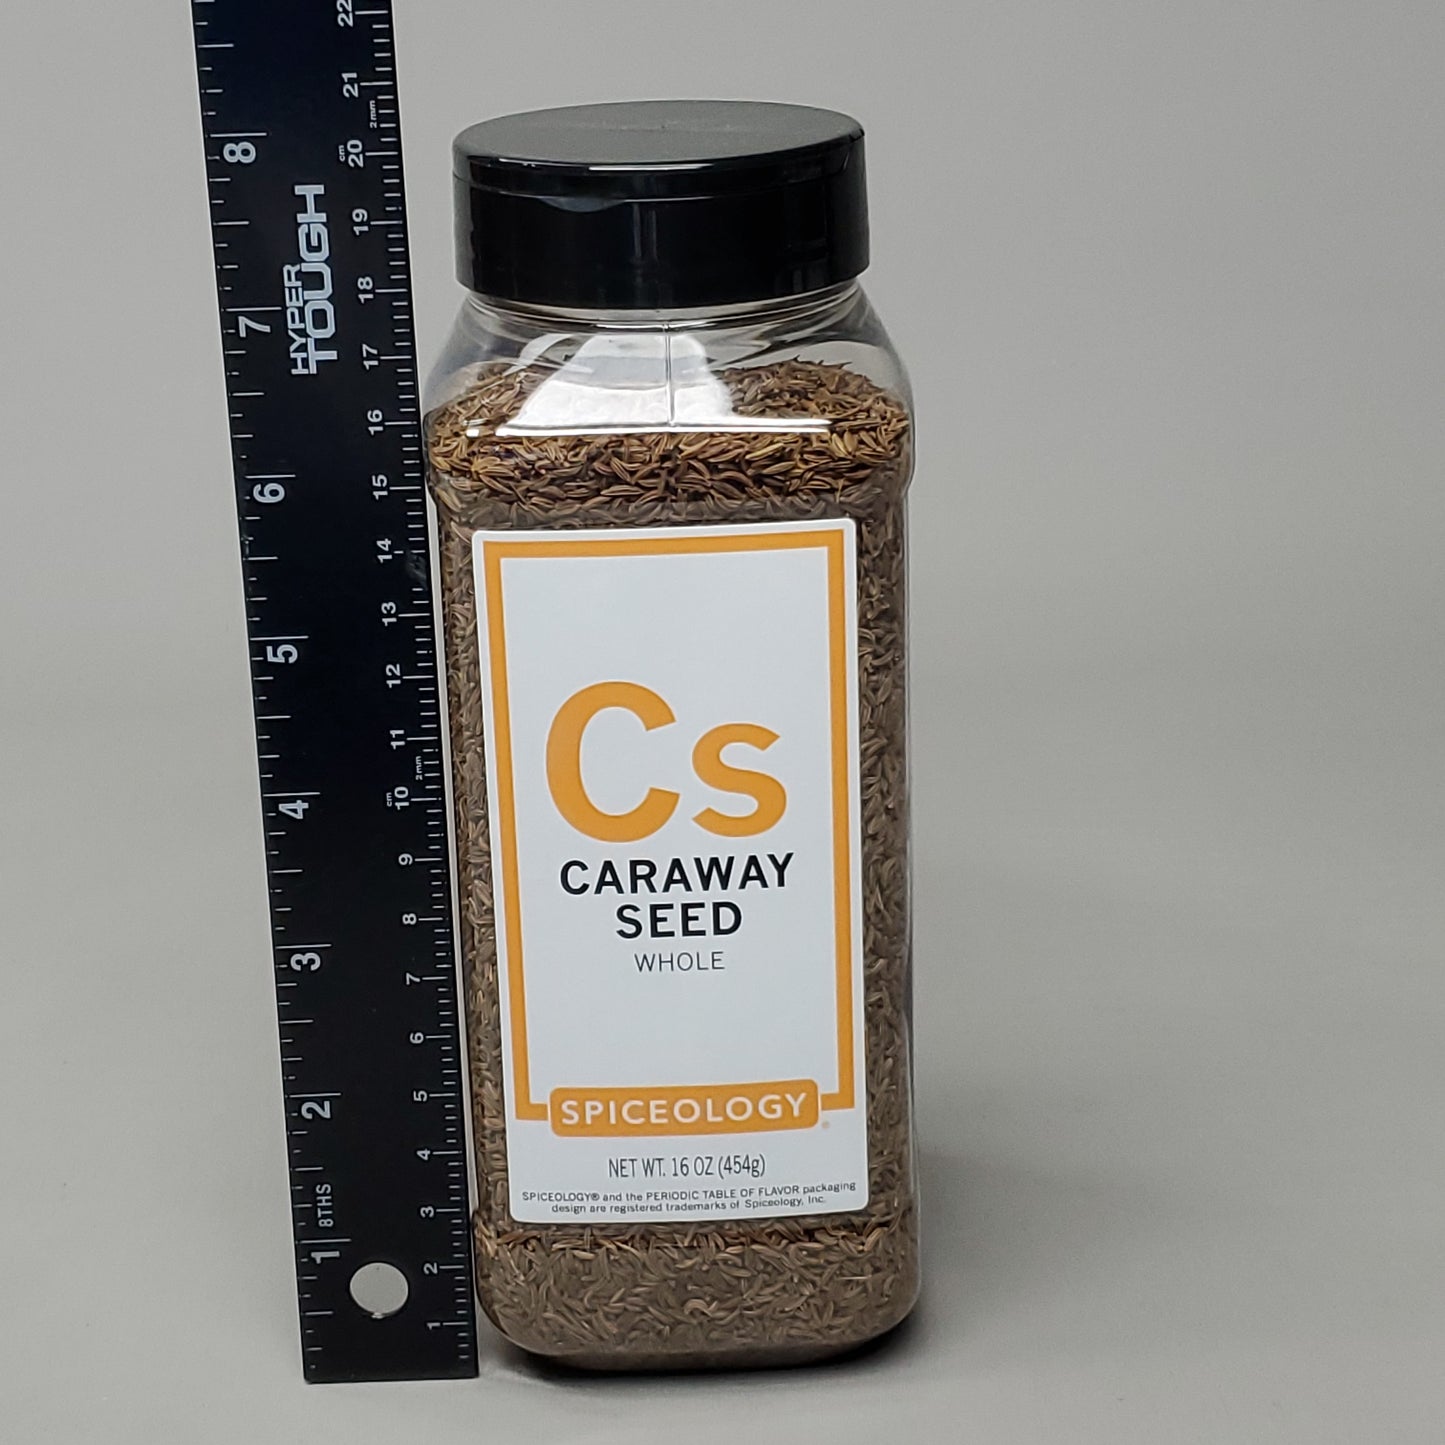 SPICEOLOGY Caraway Seed Whole Large 16 oz Exp 04/01/2025 (New)